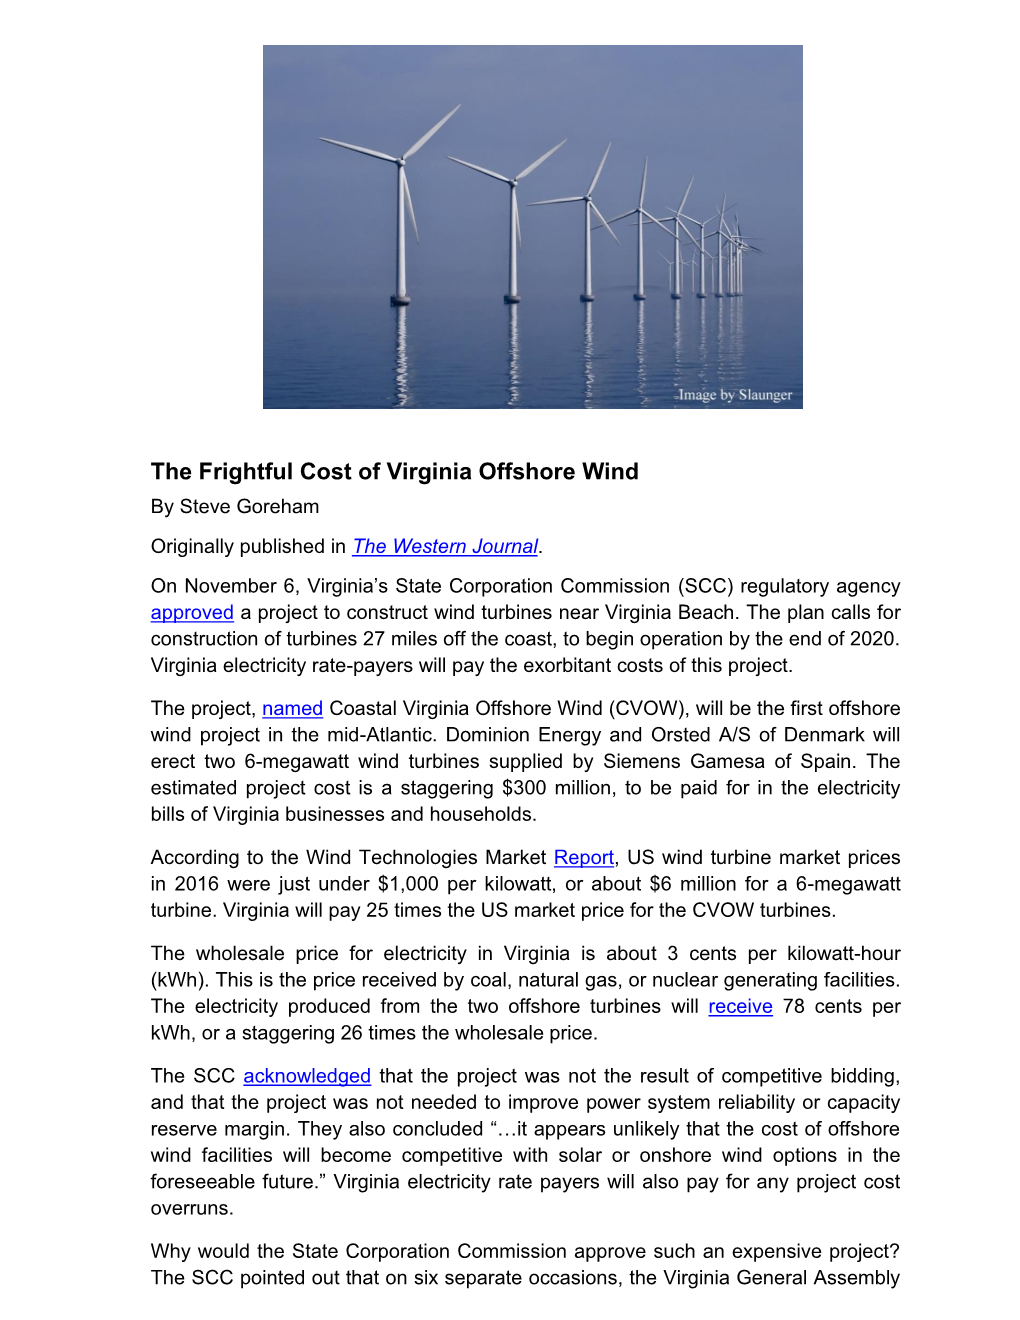 The Frightful Cost of Virginia Offshore Wind by Steve Goreham Originally Published in the Western Journal